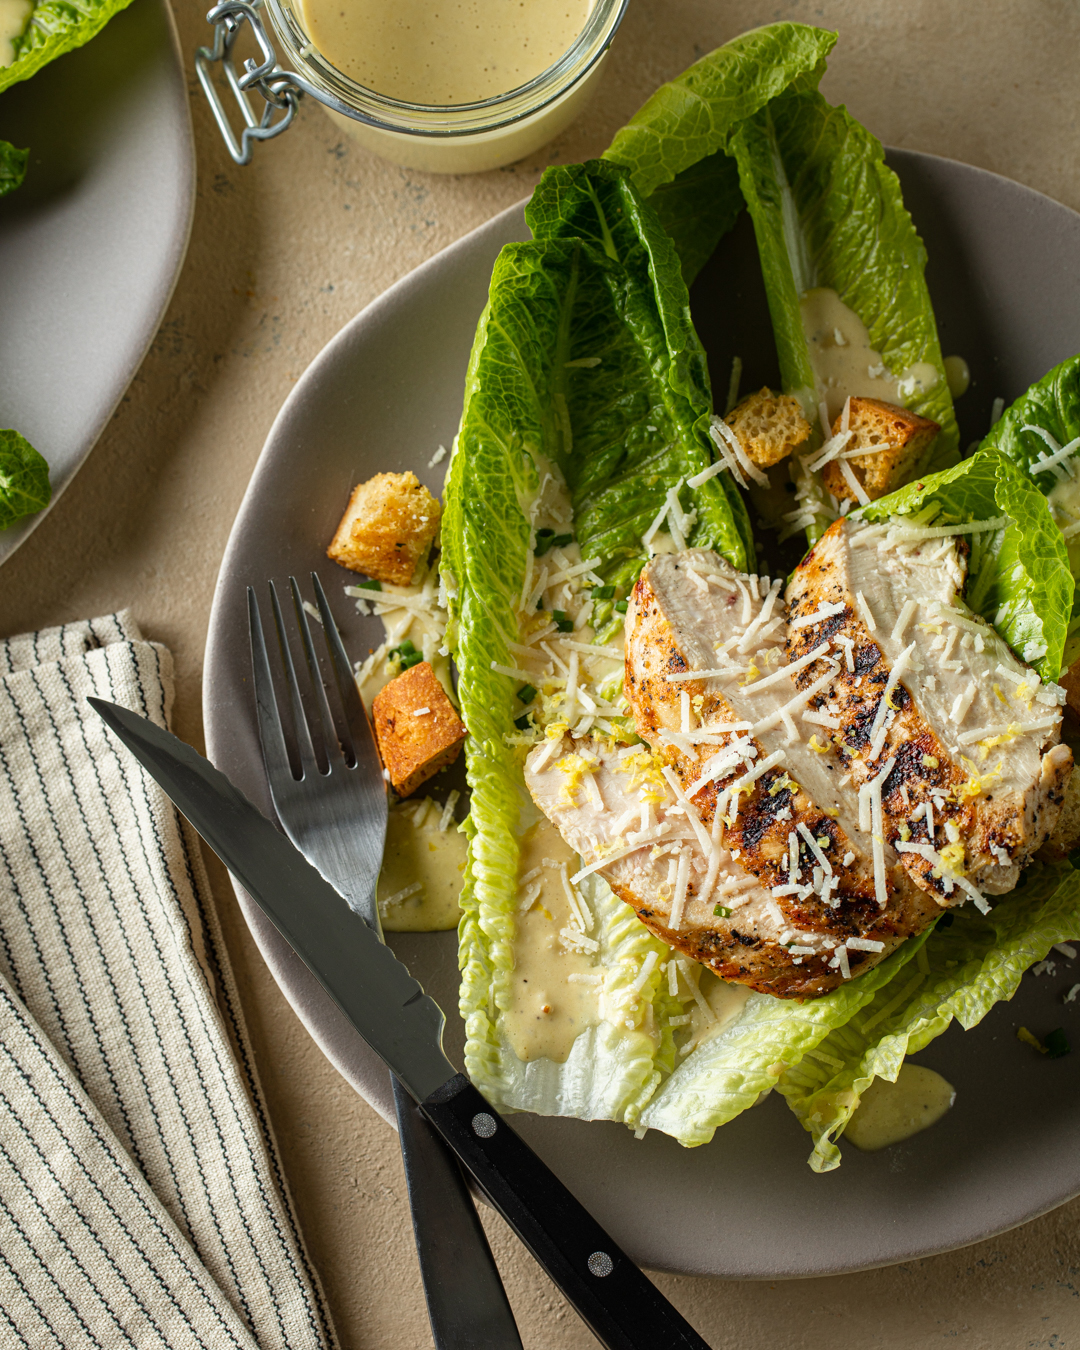 How to Make Grilled Chicken Caesar Salad with Homemade Croutons